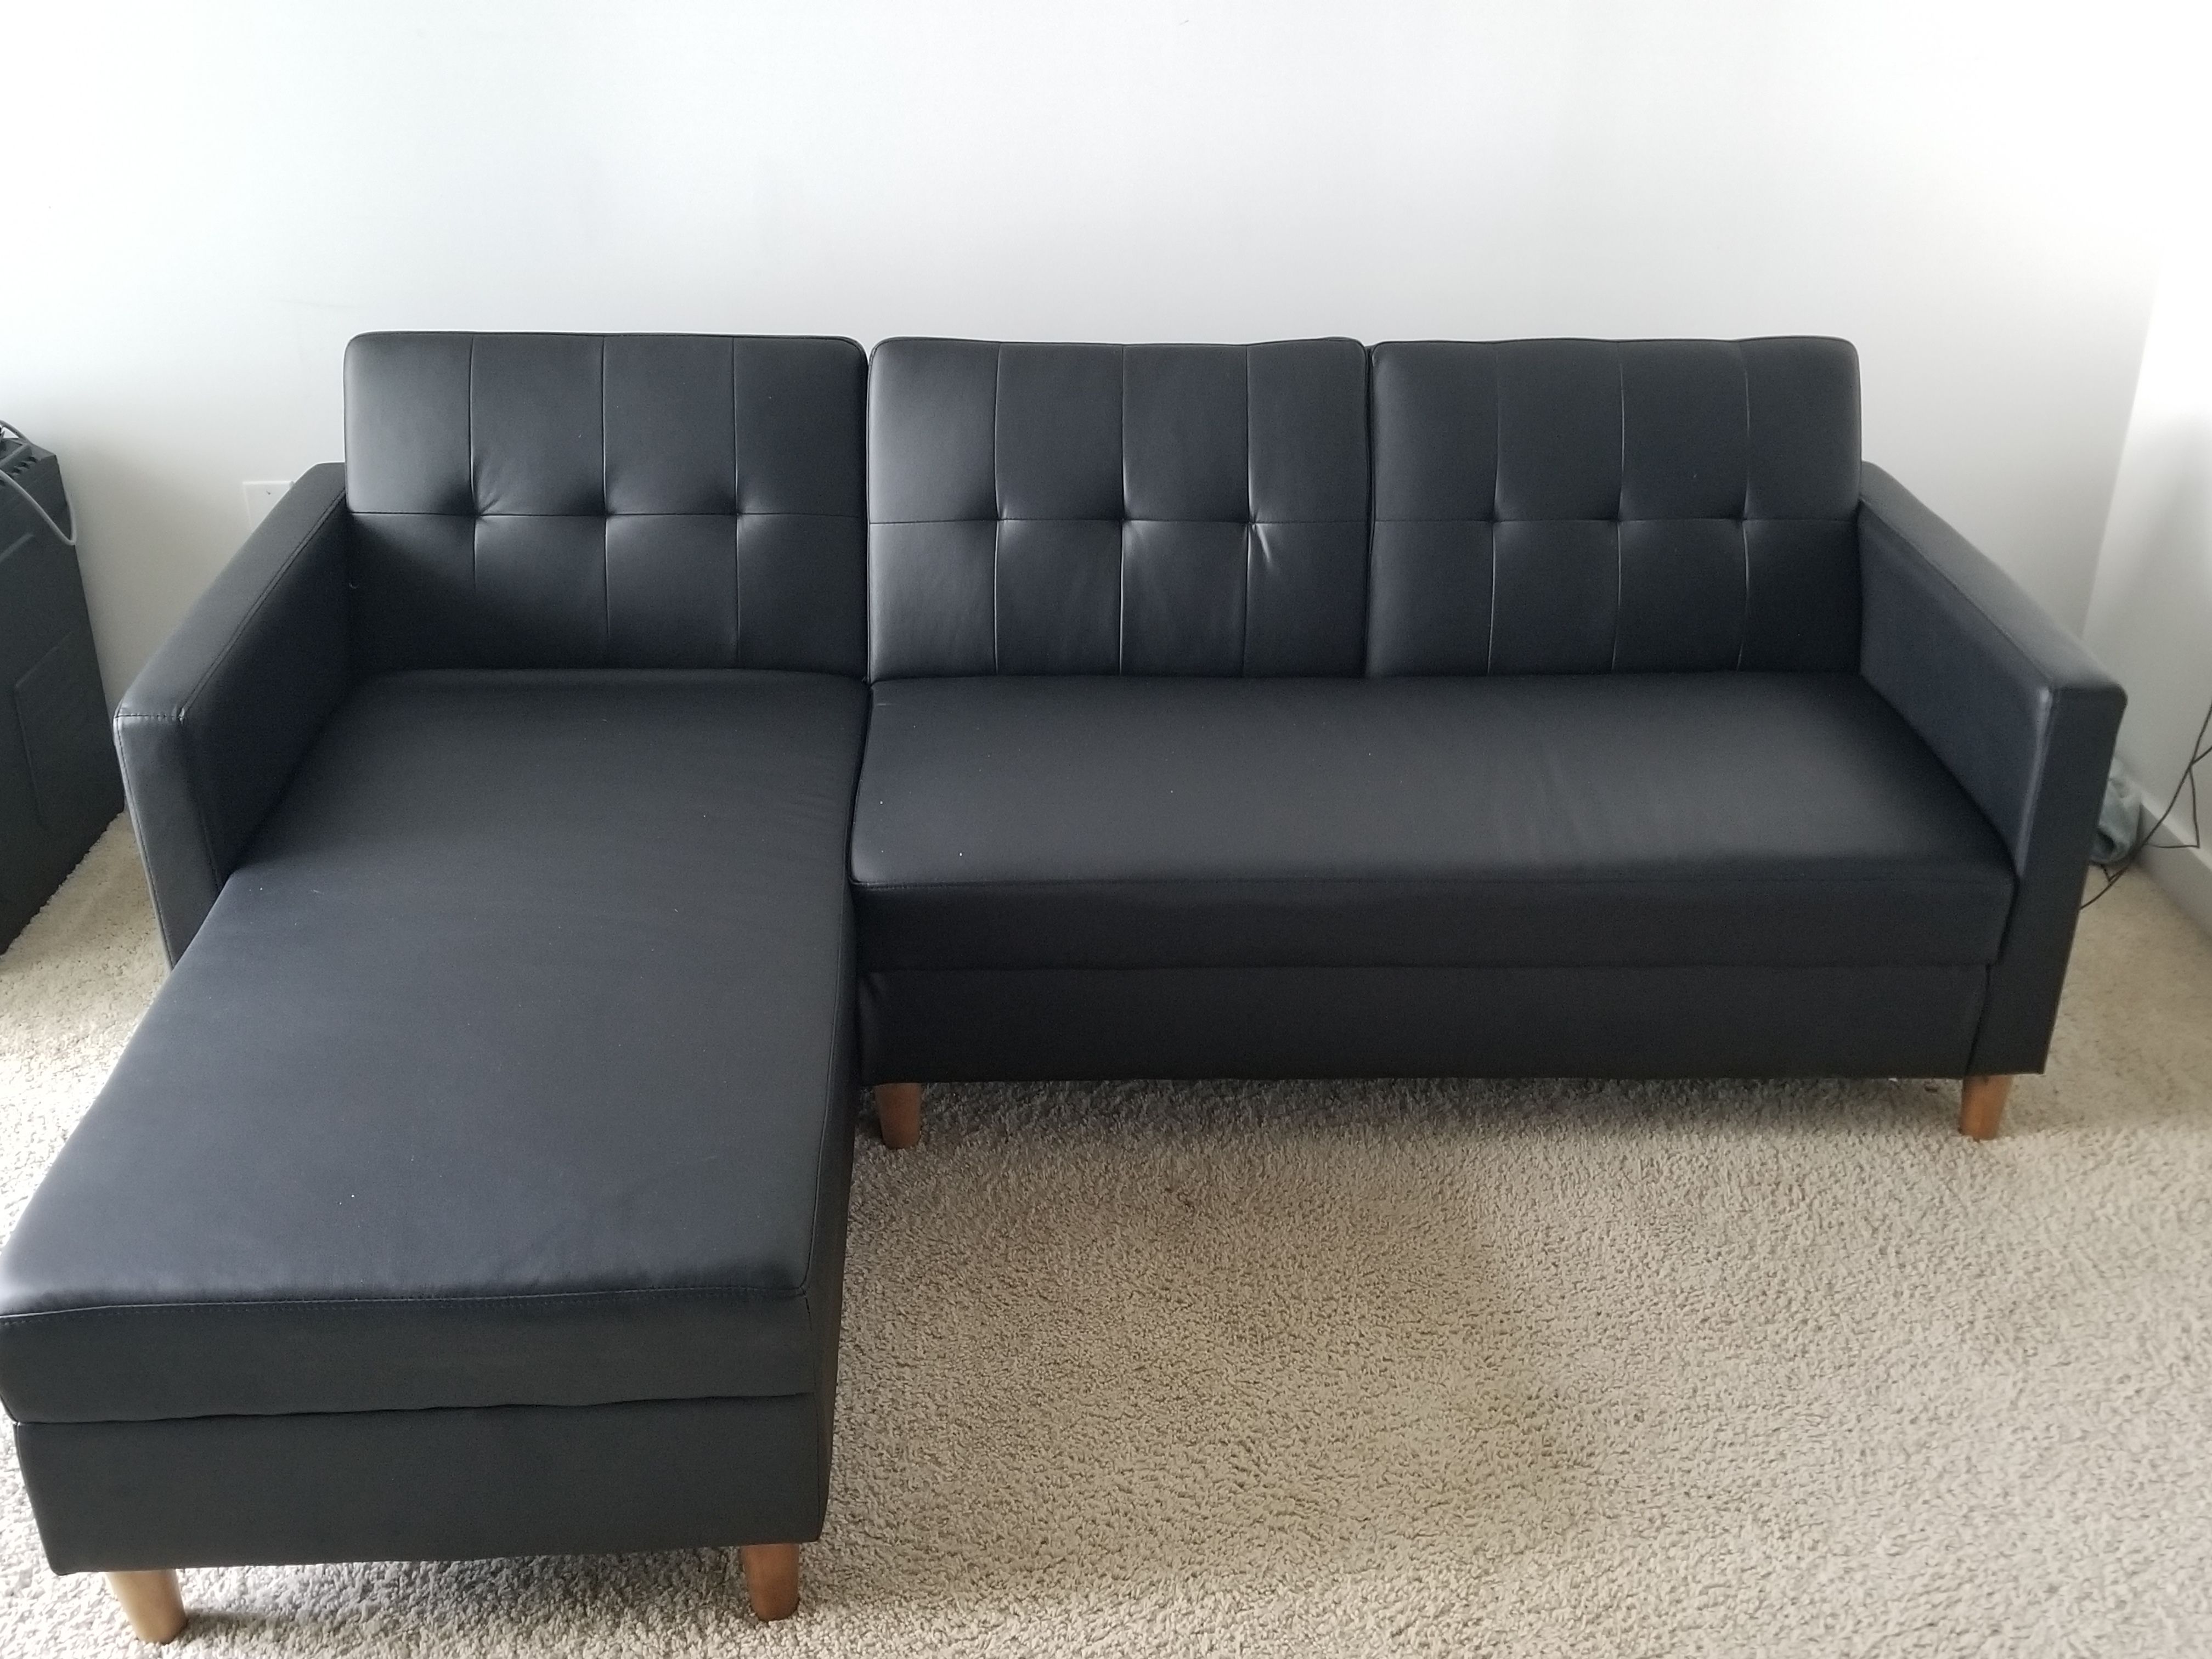 L shape sectional turns into a futon. $450 or best offer